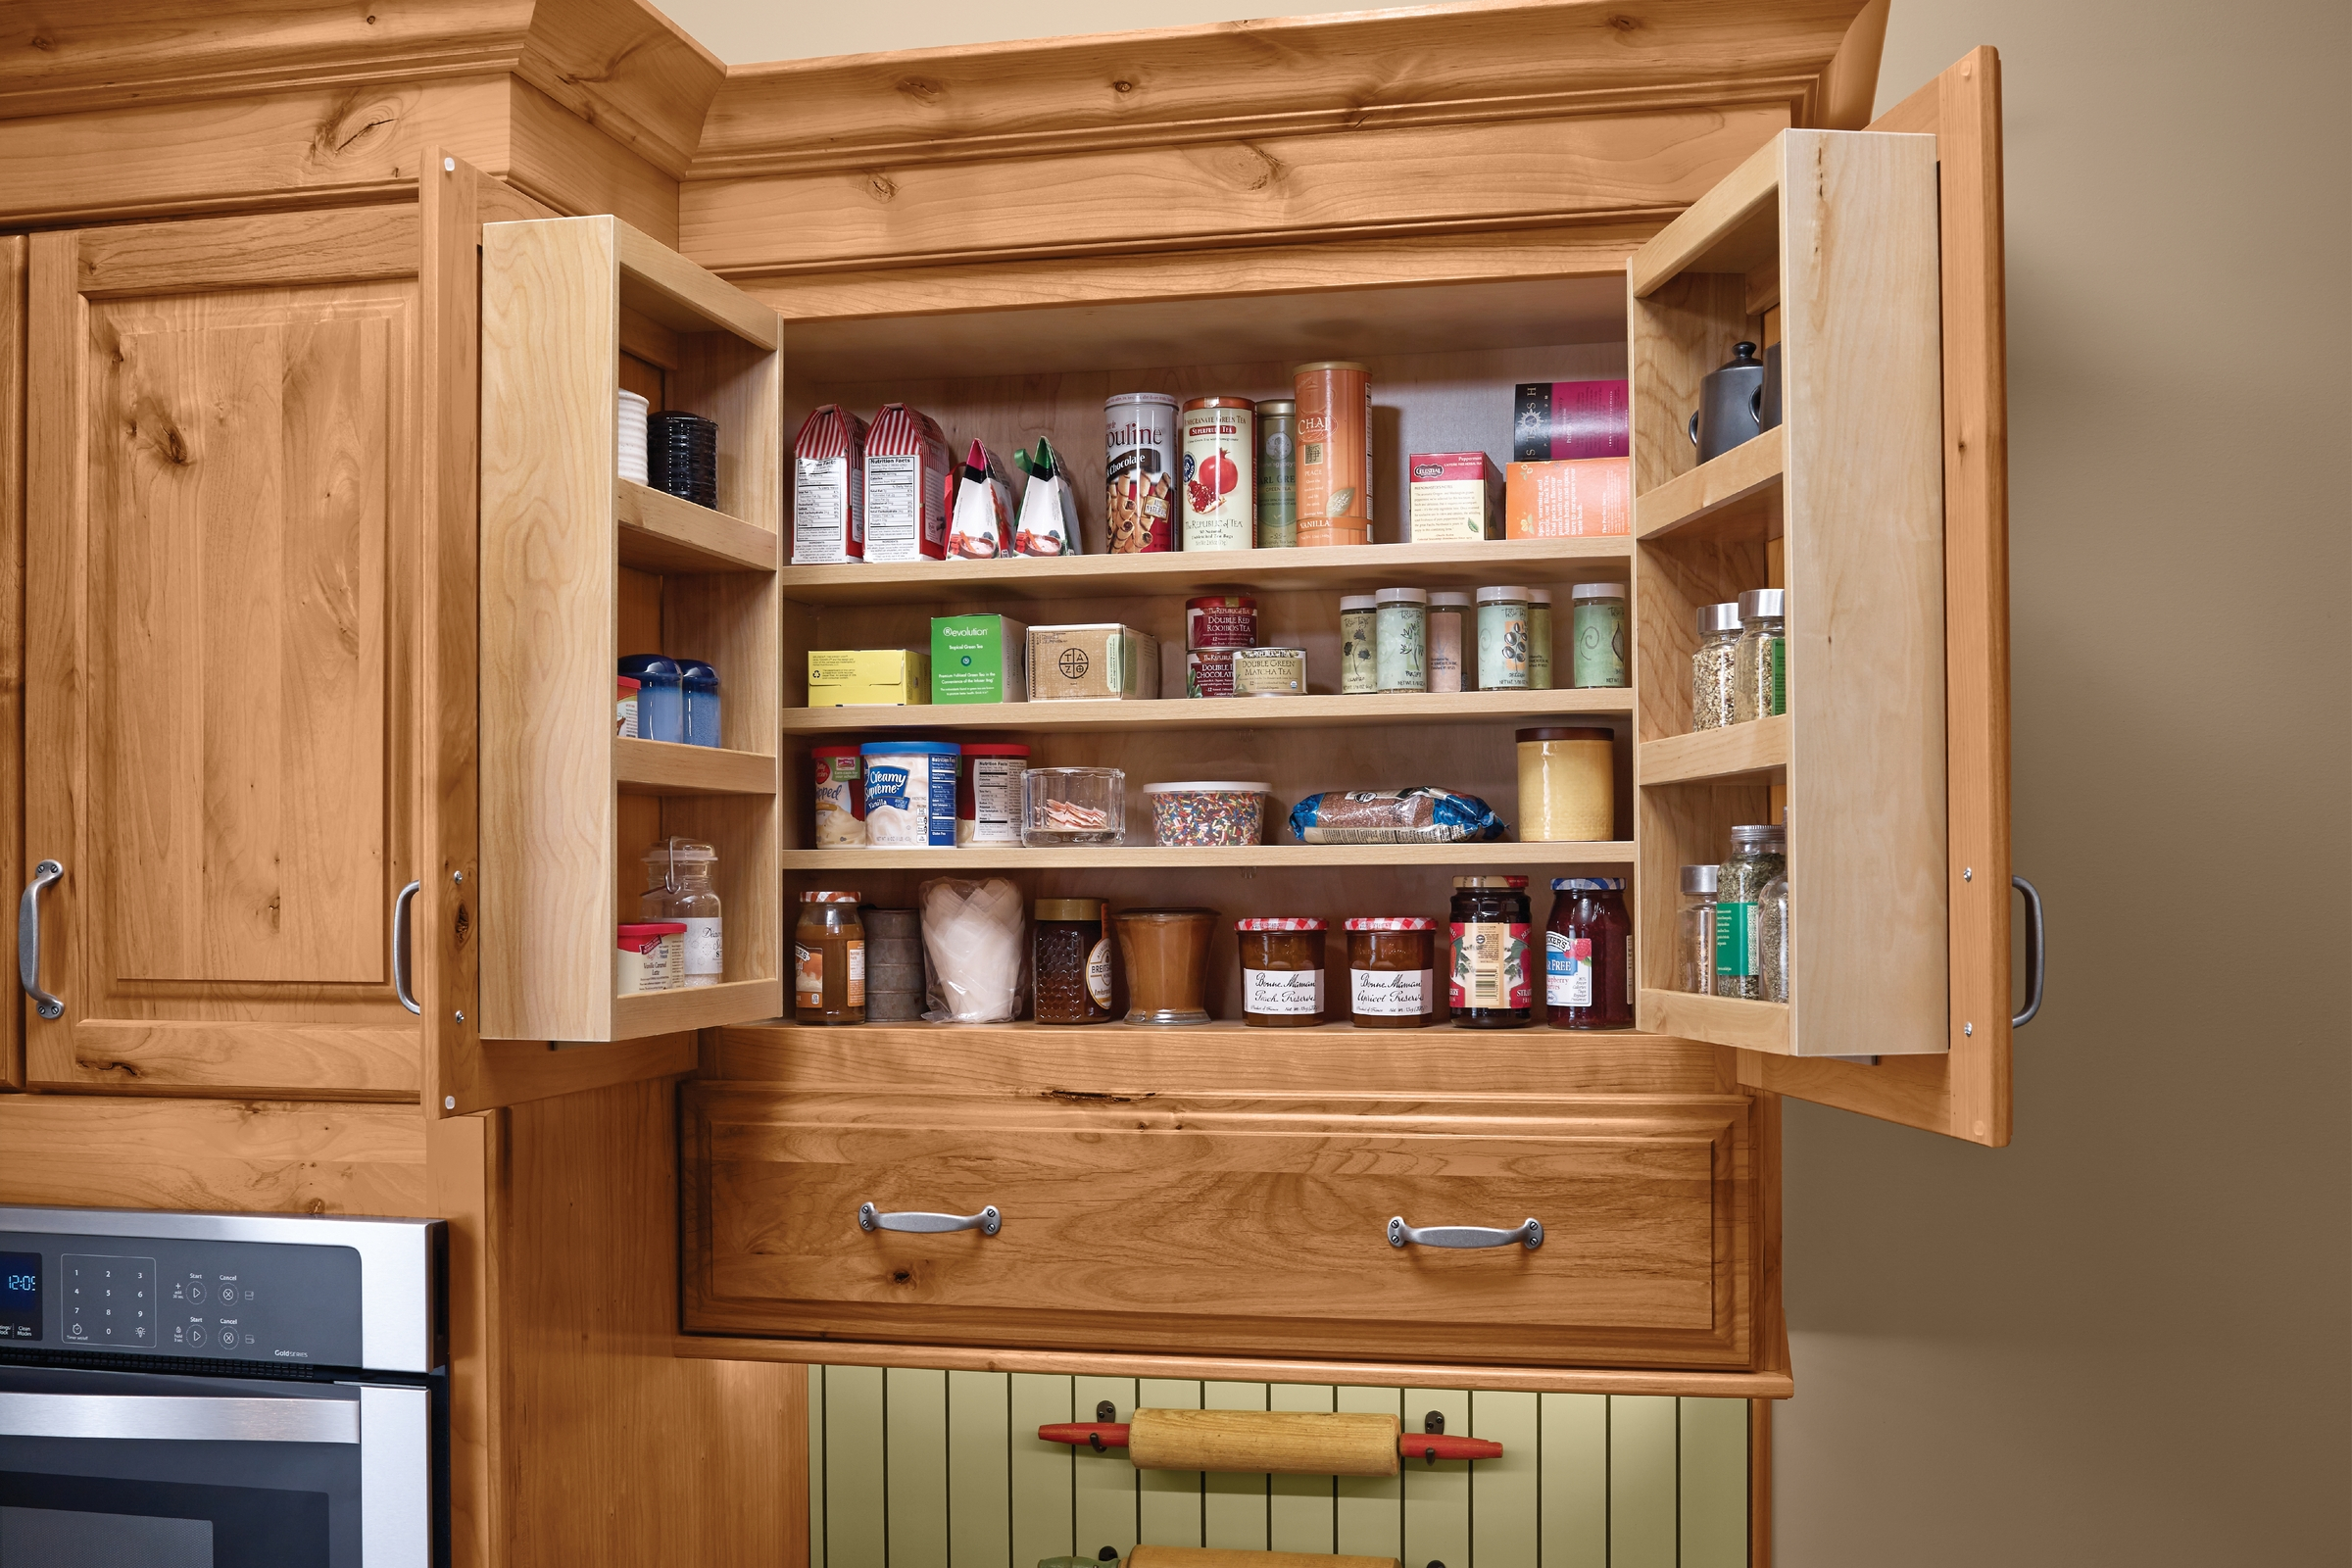 Maximize Your Kitchen With These 7 Pull-Out Shelf Ideas